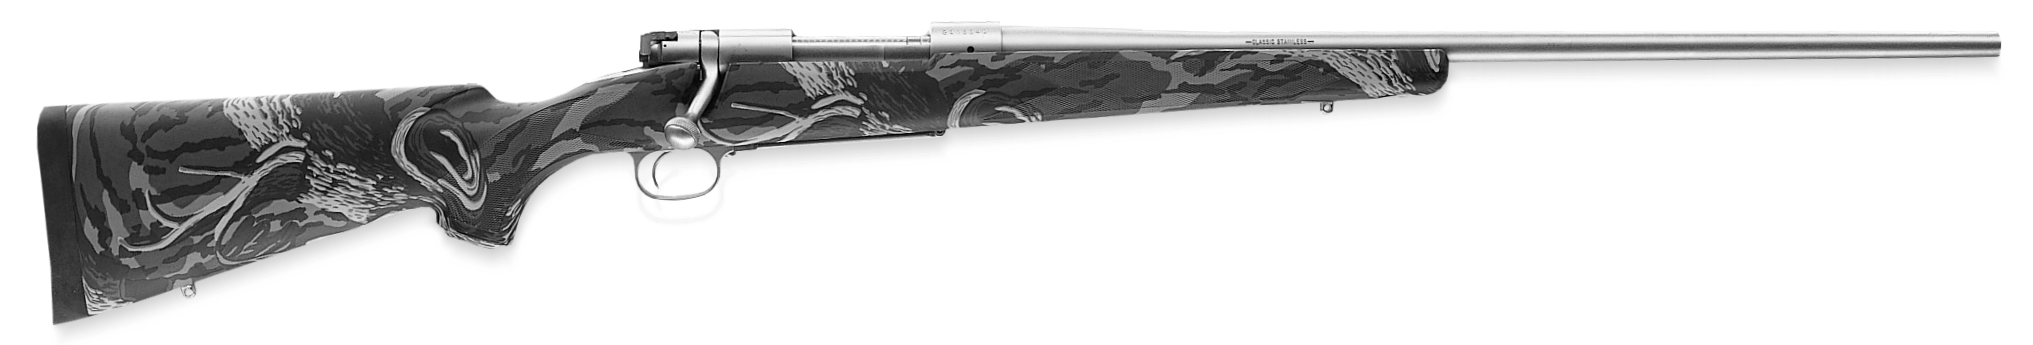 Model 70 Classic Camo Stainless